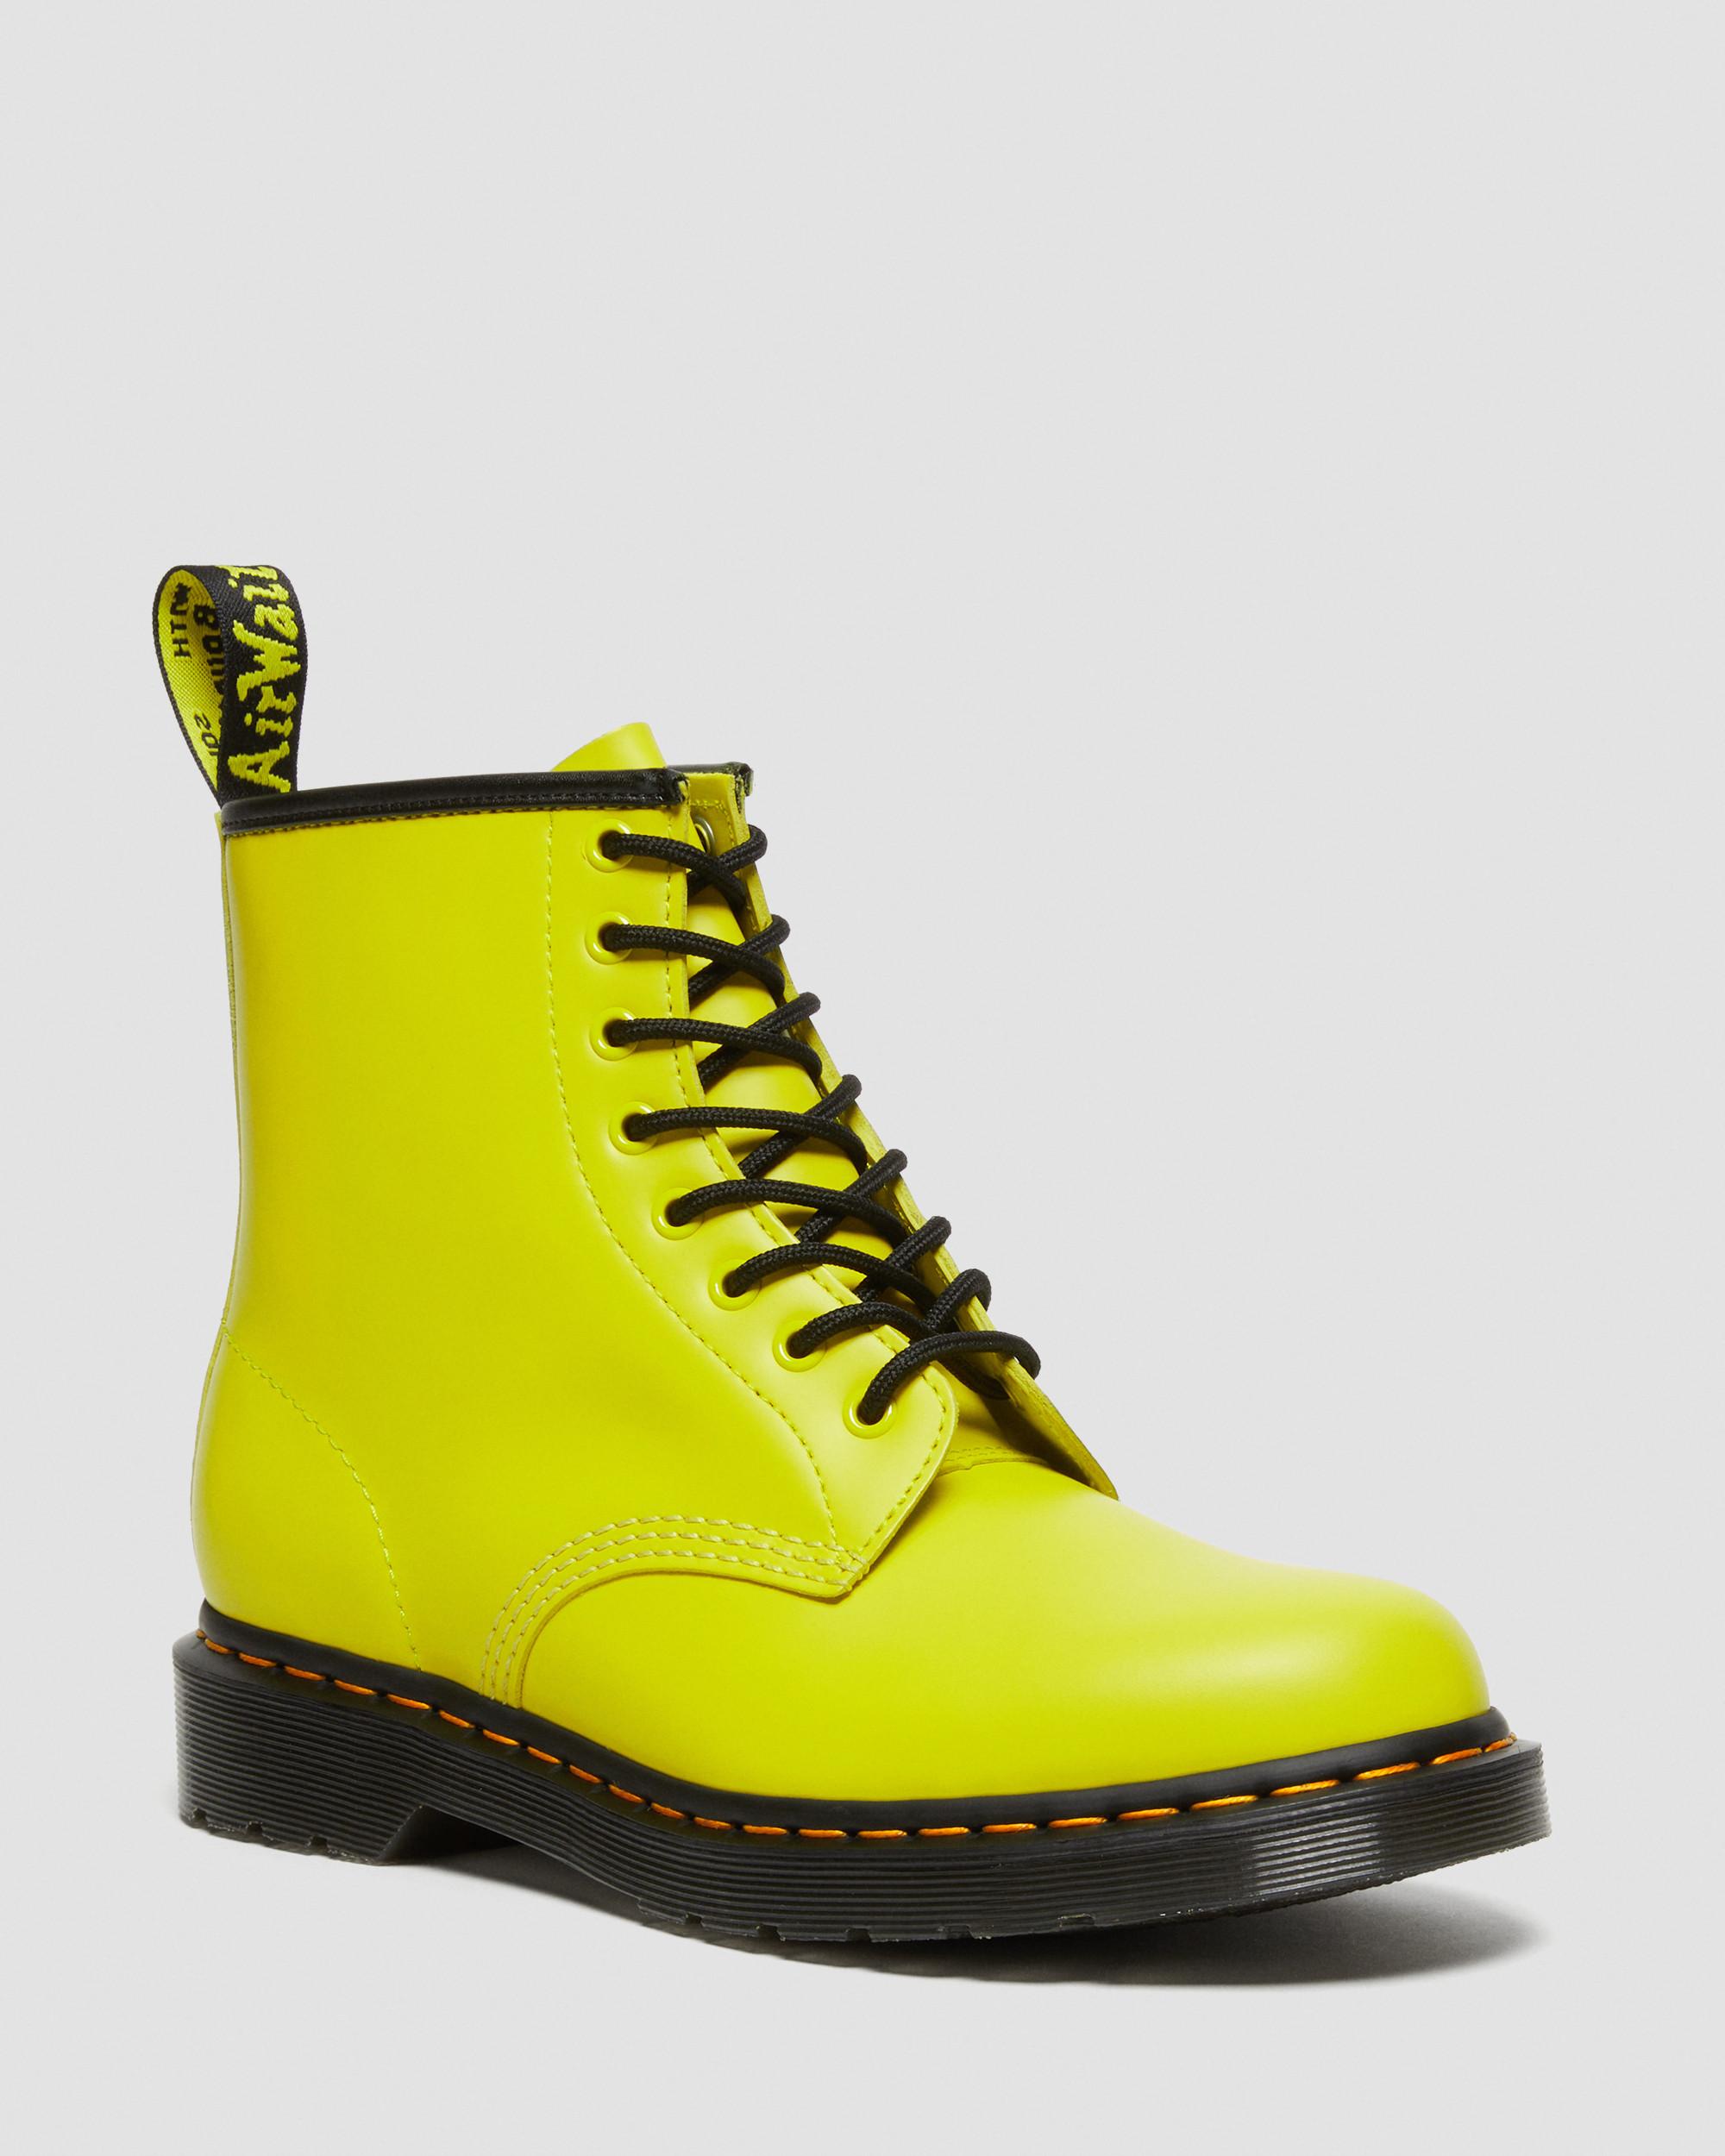 You may not think to style neon leggings with Dr. Martens, but